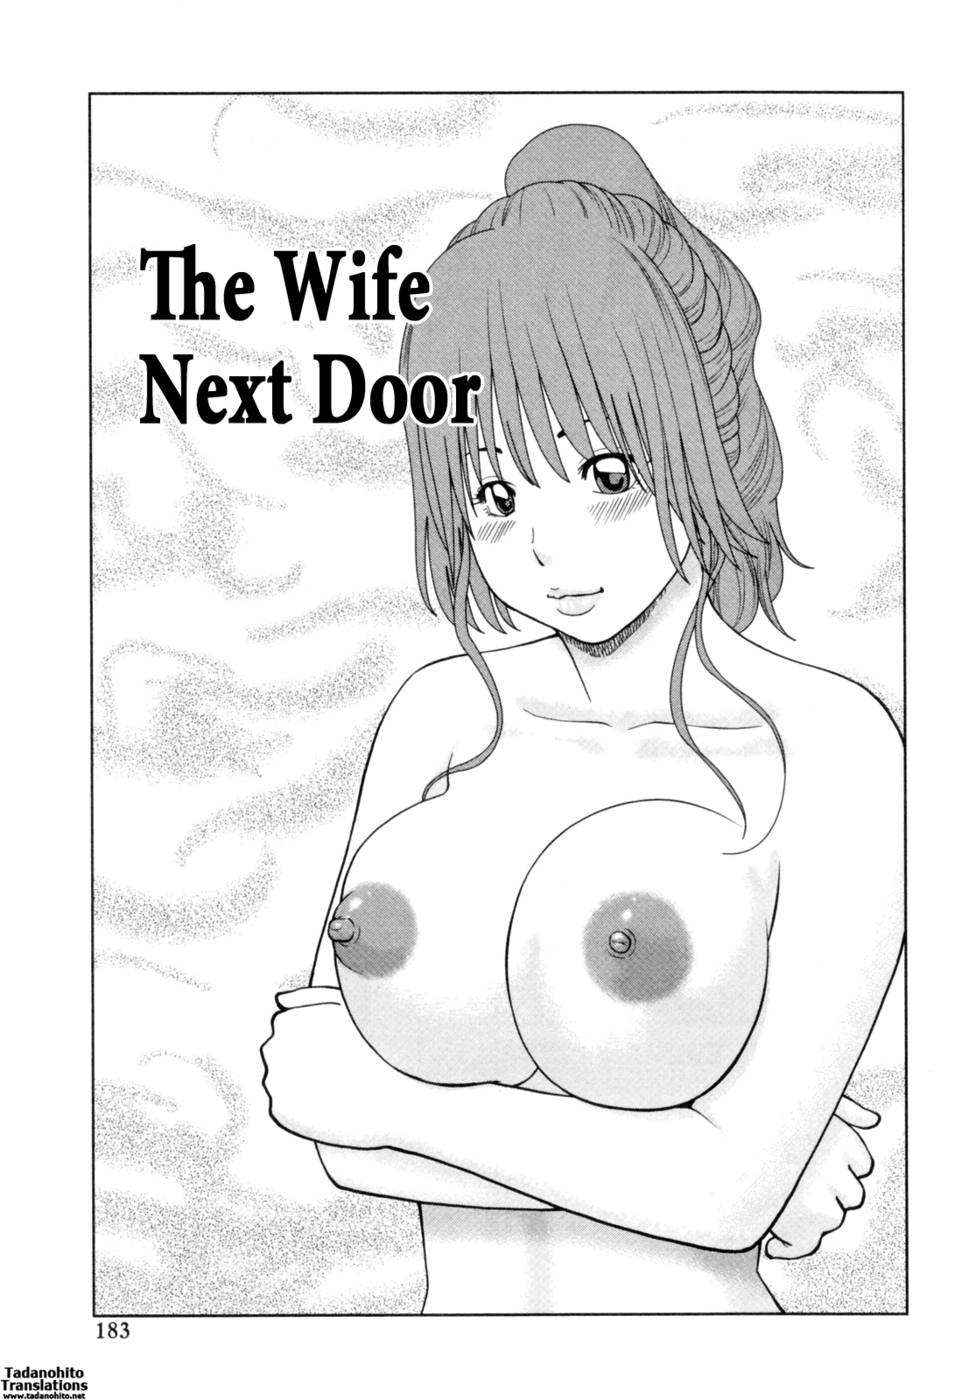 32 Year Old Unsatisfied Wife-Chapter 10-The Wife Next Door-Hentai Manga Hentai Comic pic image